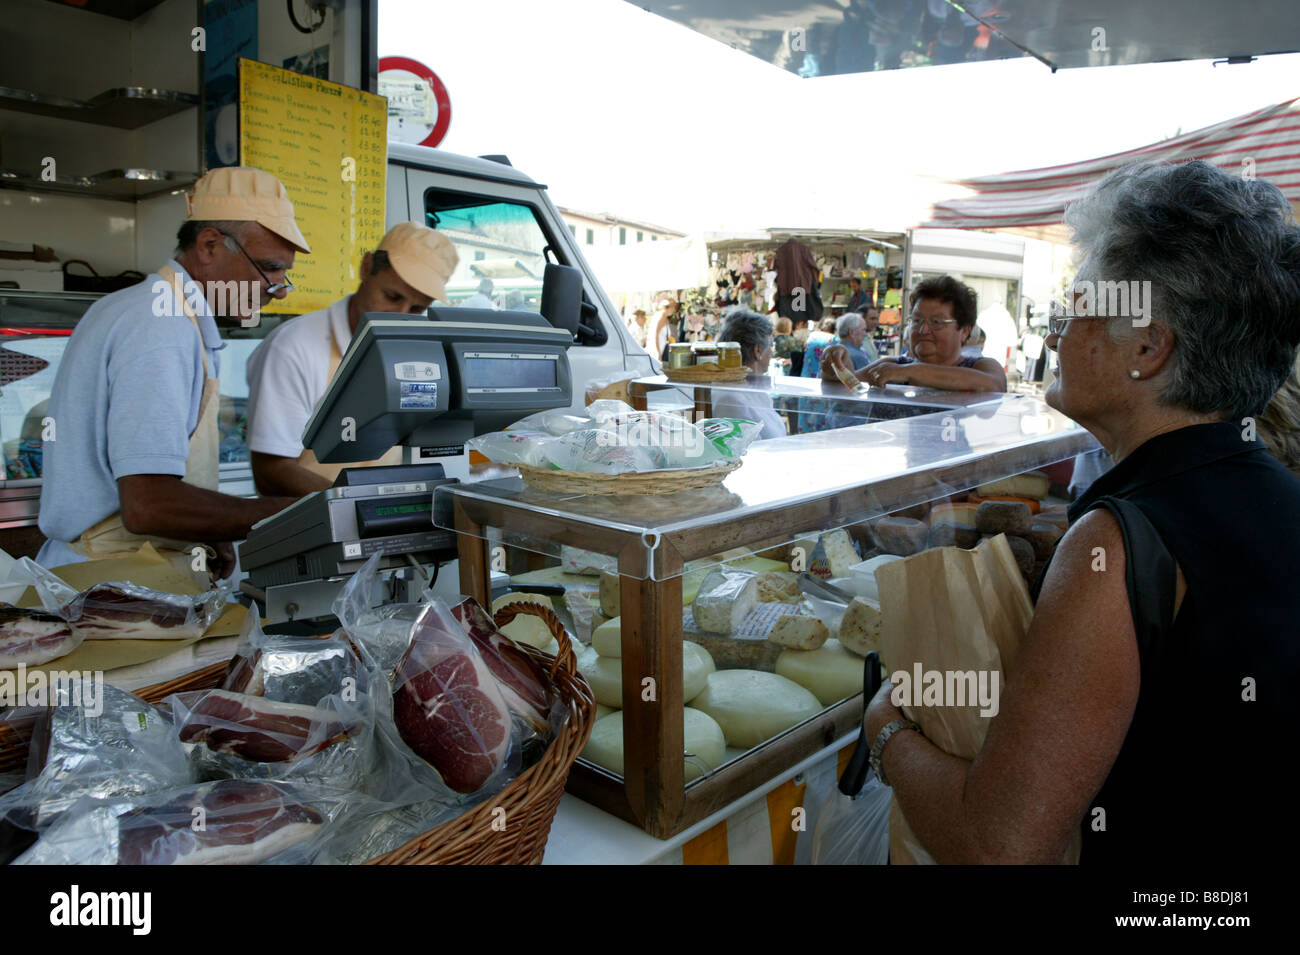 Landscape horizontal format Italian village market stall selling numerous cheeses and meats elderly retired old individuals Stock Photo